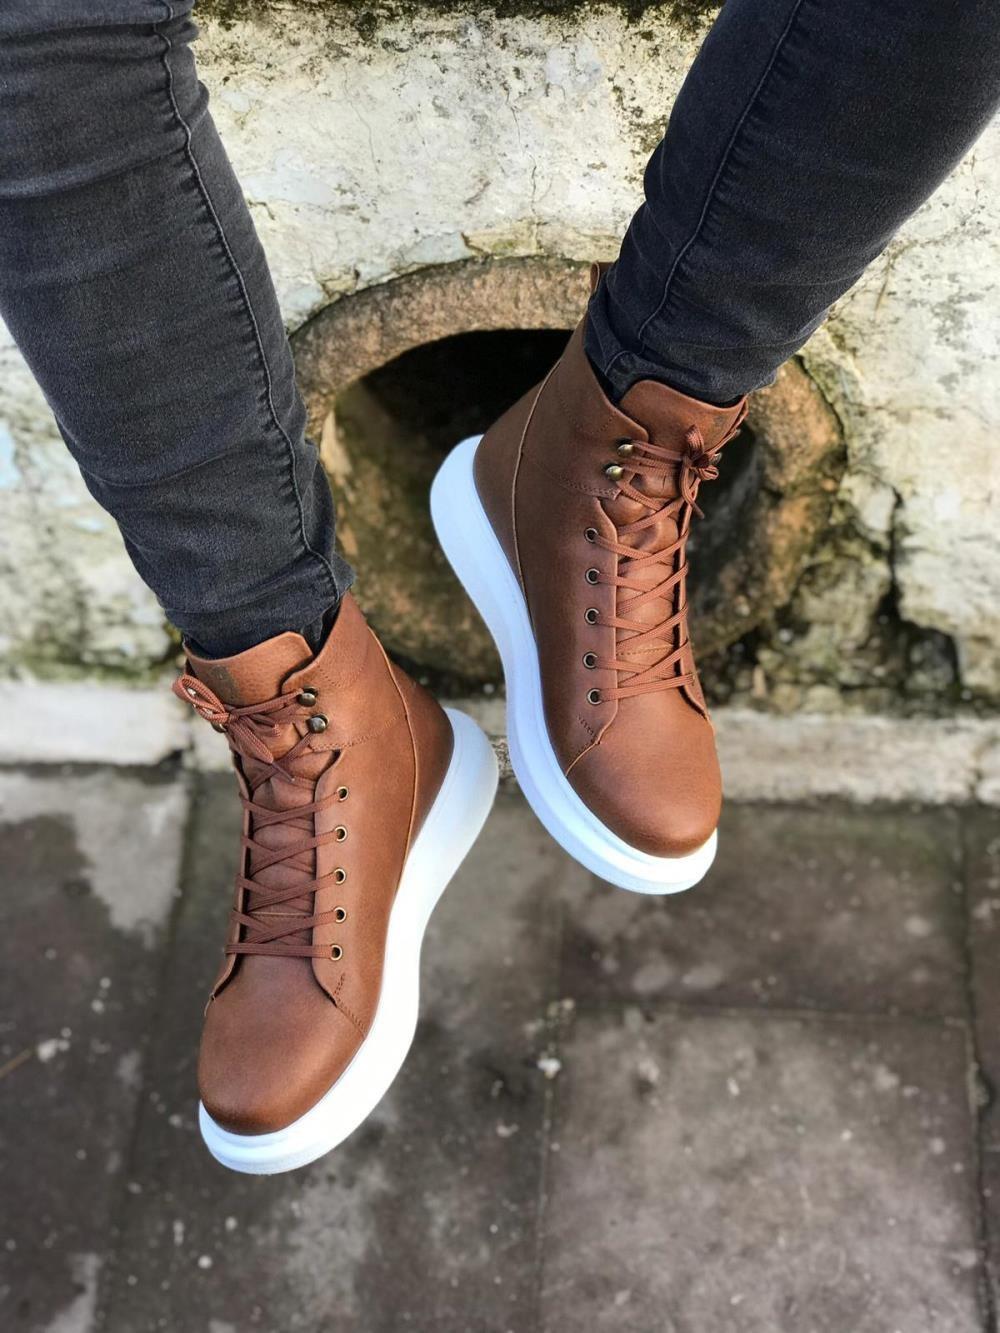 Men's High Sole Boot Shoes - STREETMODE ™